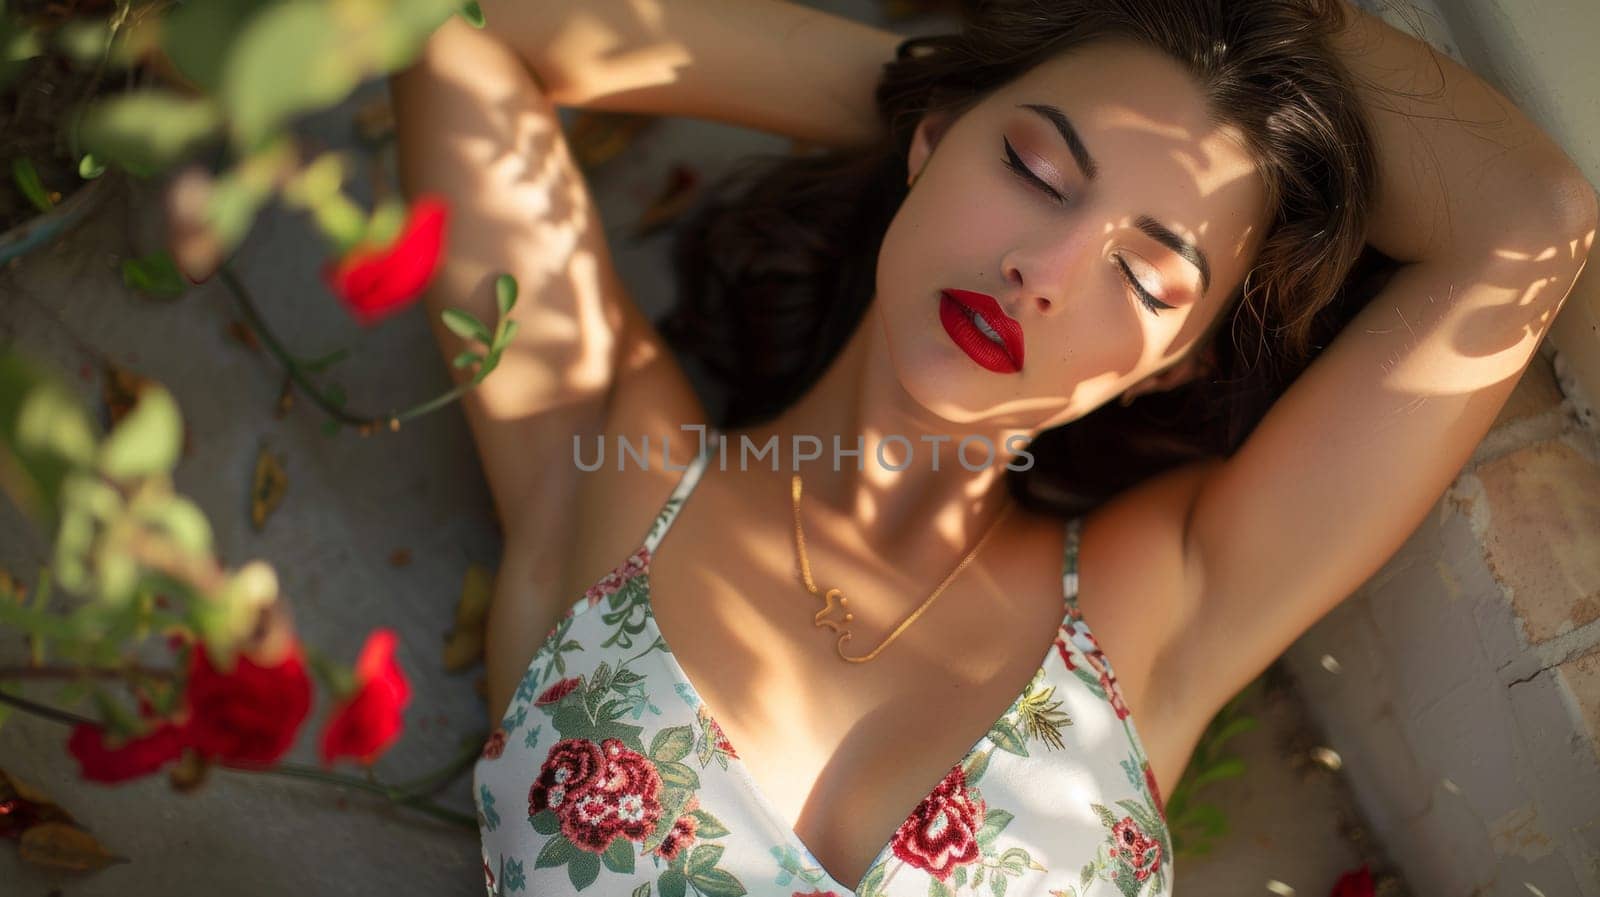 A woman in a floral top with red lipstick laying on the ground, AI by starush